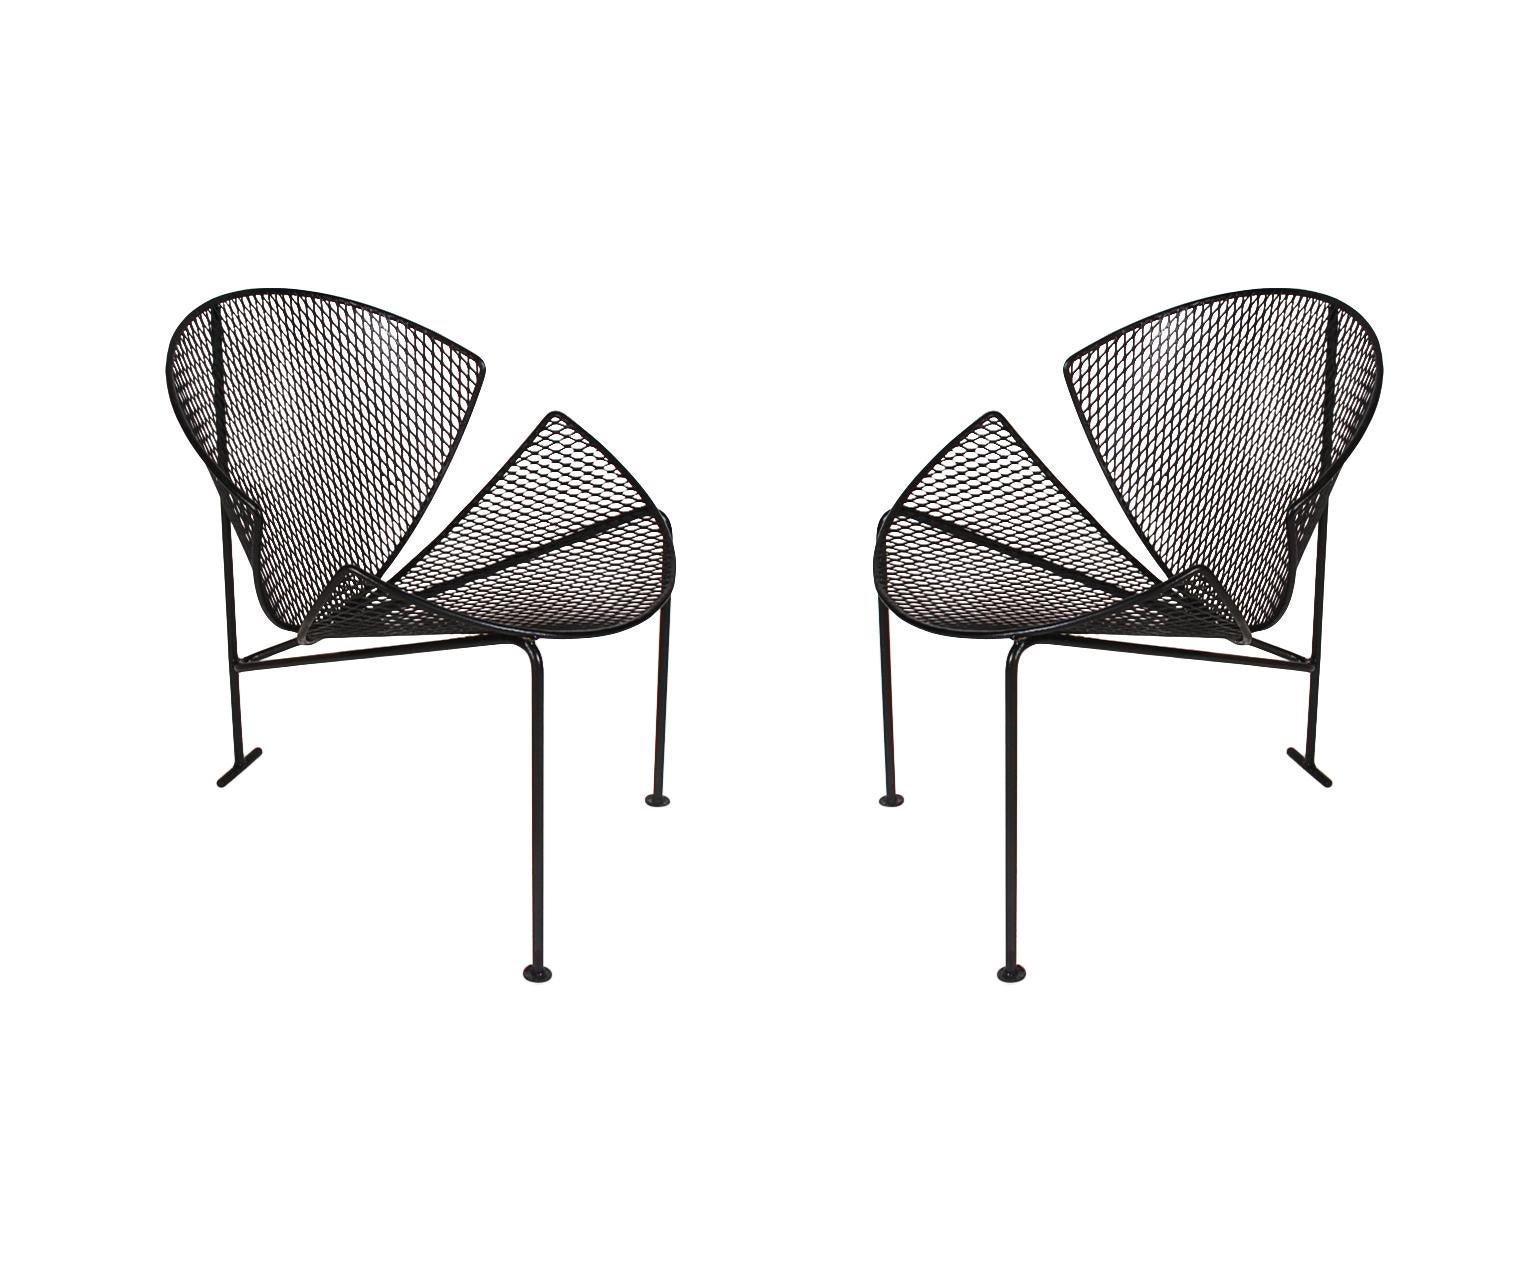 Italian Pair of Mid-Century Modern Patio Lounge Clamshell Chairs by Salterini